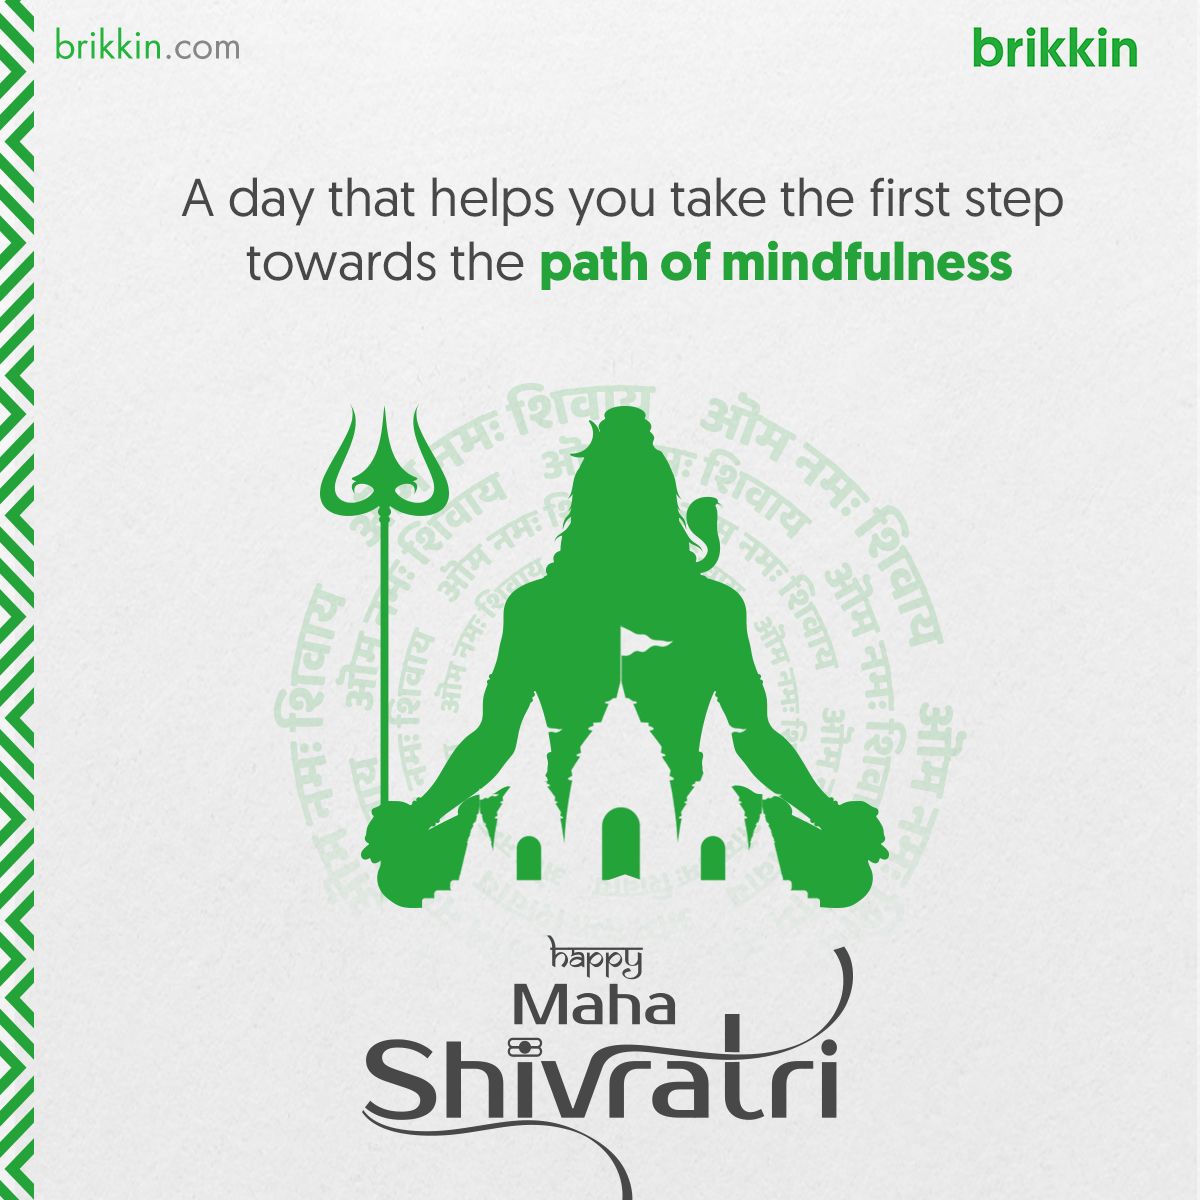 May the divine blessings of Lord Shiva infuse your life with celestial energy, guiding you to a path of peace and prosperity.  

#BrikkinAgent #HappyMahaShivratri #CelestialEnergy #DivineLiving #TranquilityAndLuxury #LordShivaBlessings #RealEstate #Mumbai